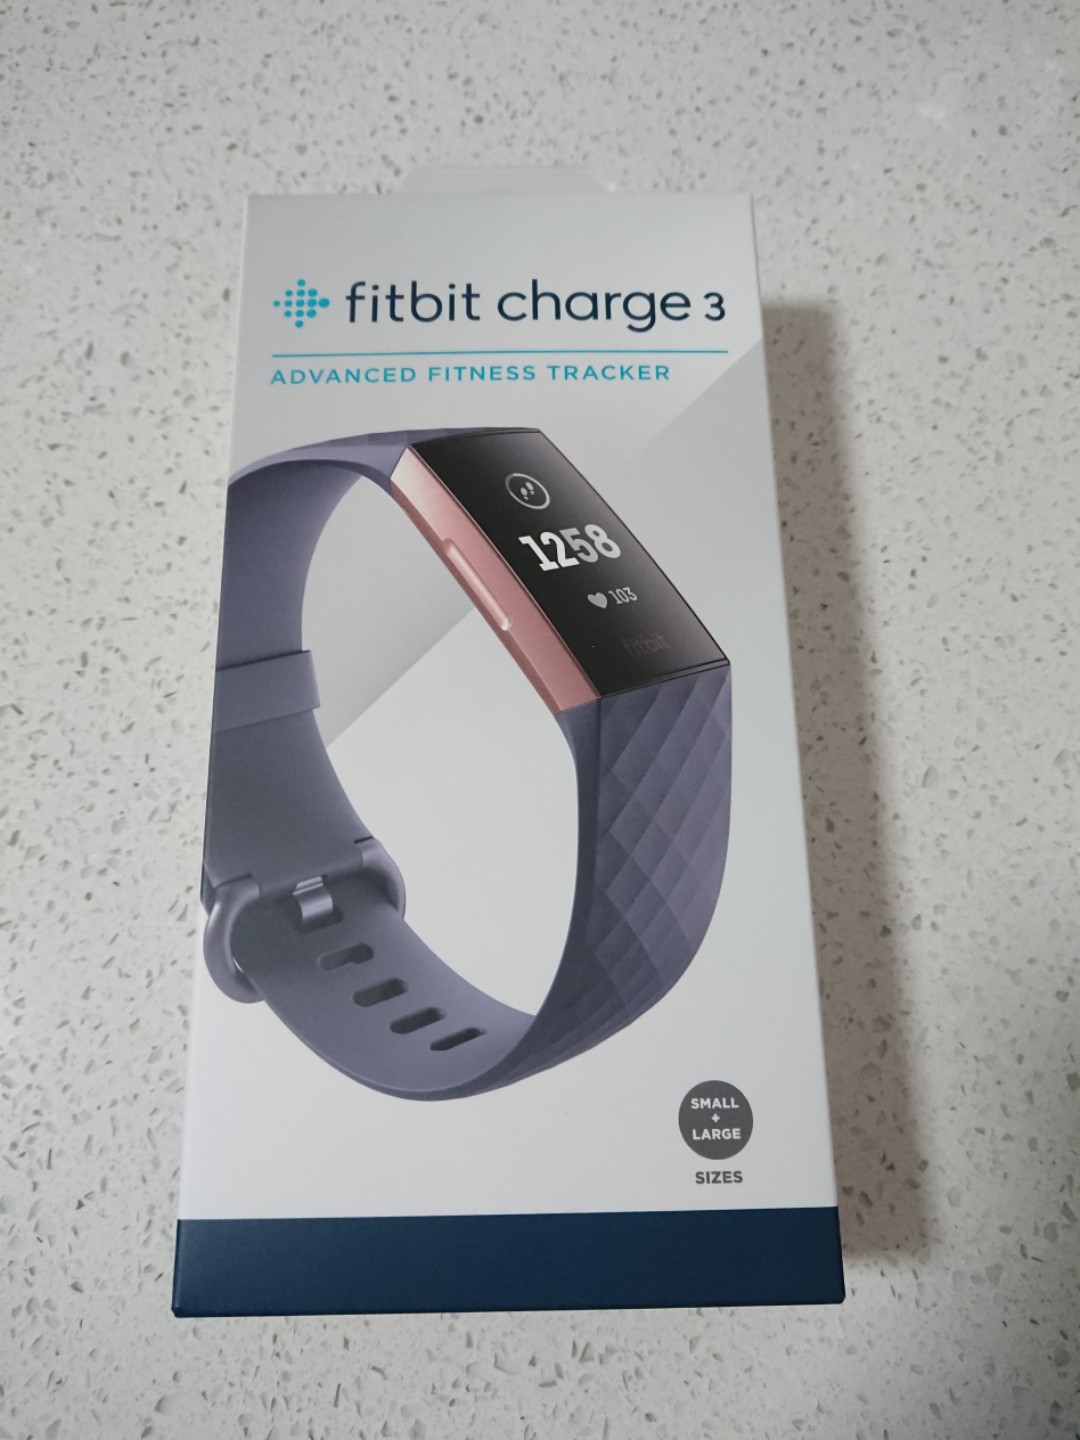 fitbit rose gold and grey